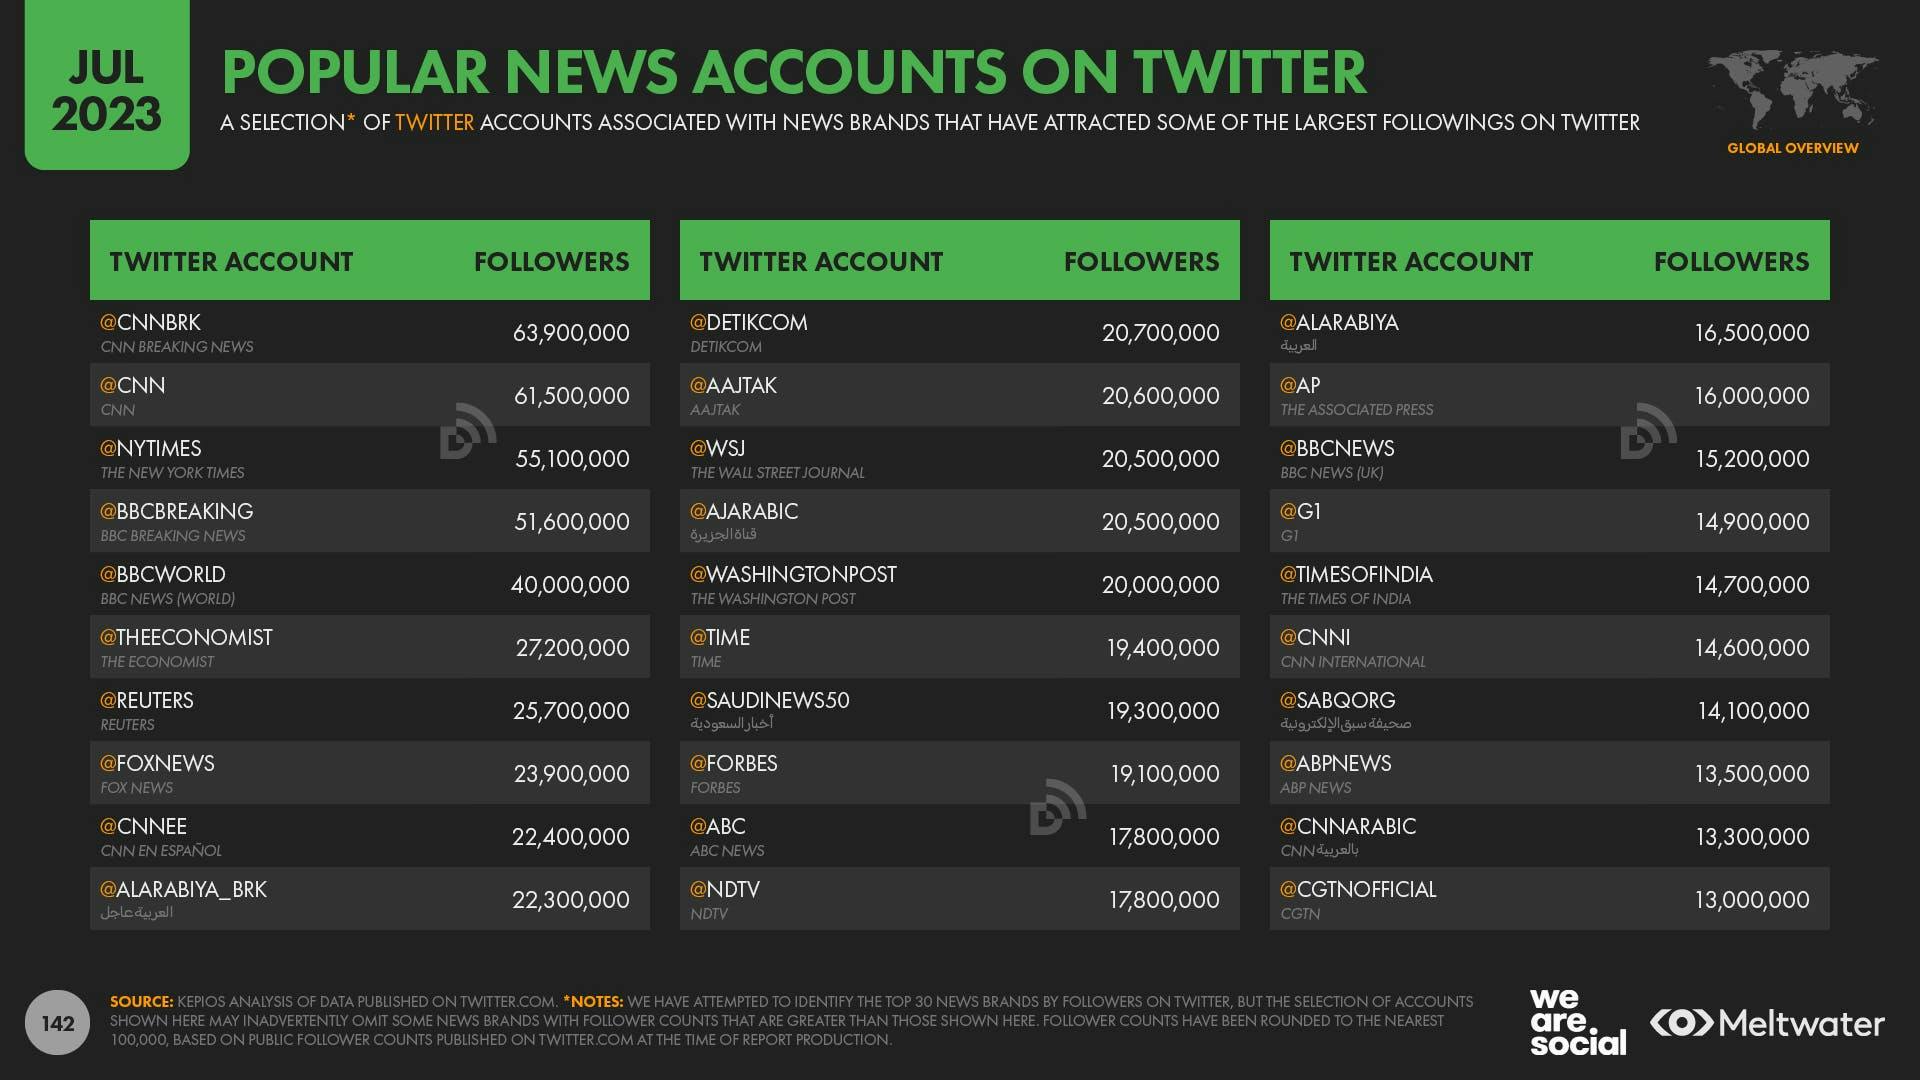 A list of the most popular news accounts on Twitter, topped by @CNNbrk with 63.9 million followers.